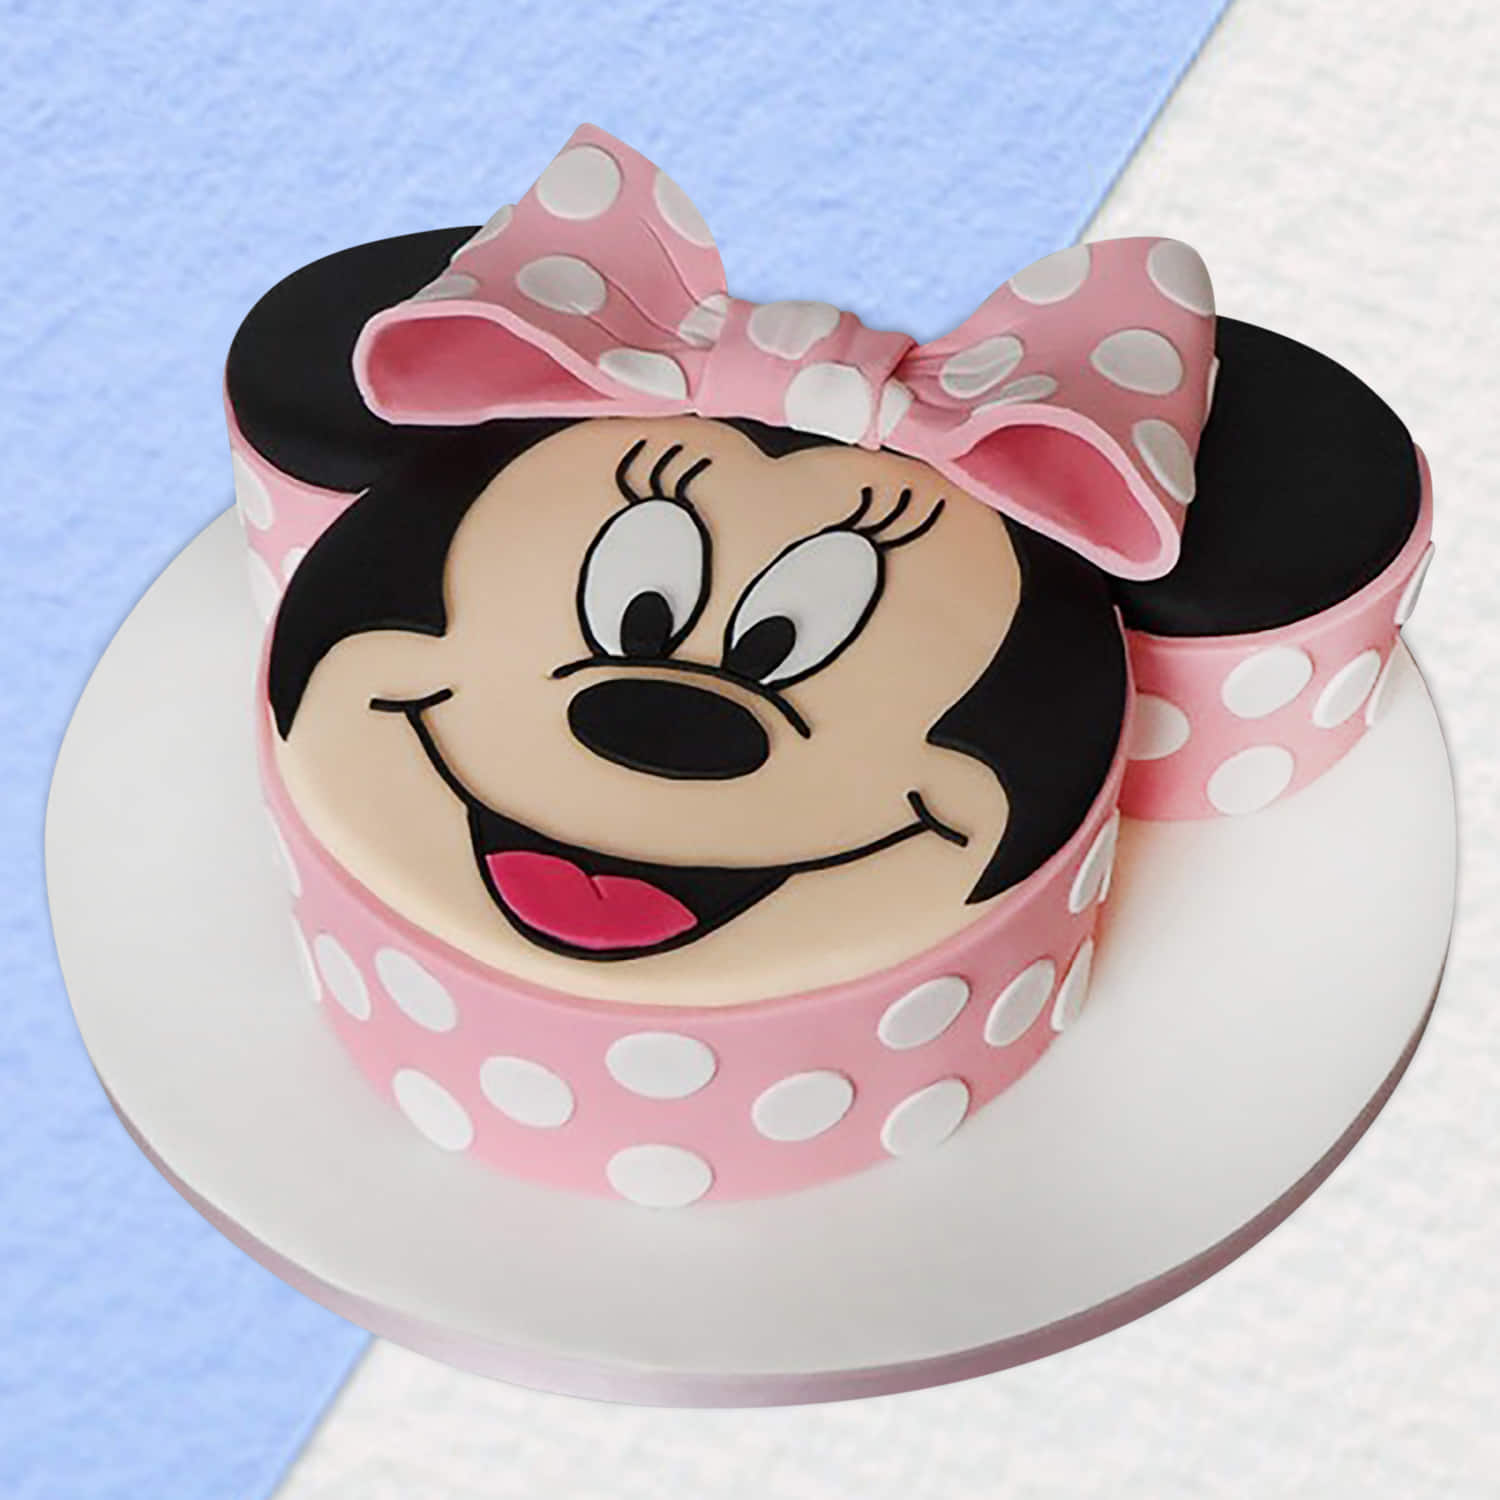 How to Make a Minnie Mouse Cake / Cake Decorating Tutorial Step by Step /  Fondant Rose Tutorial - YouTube